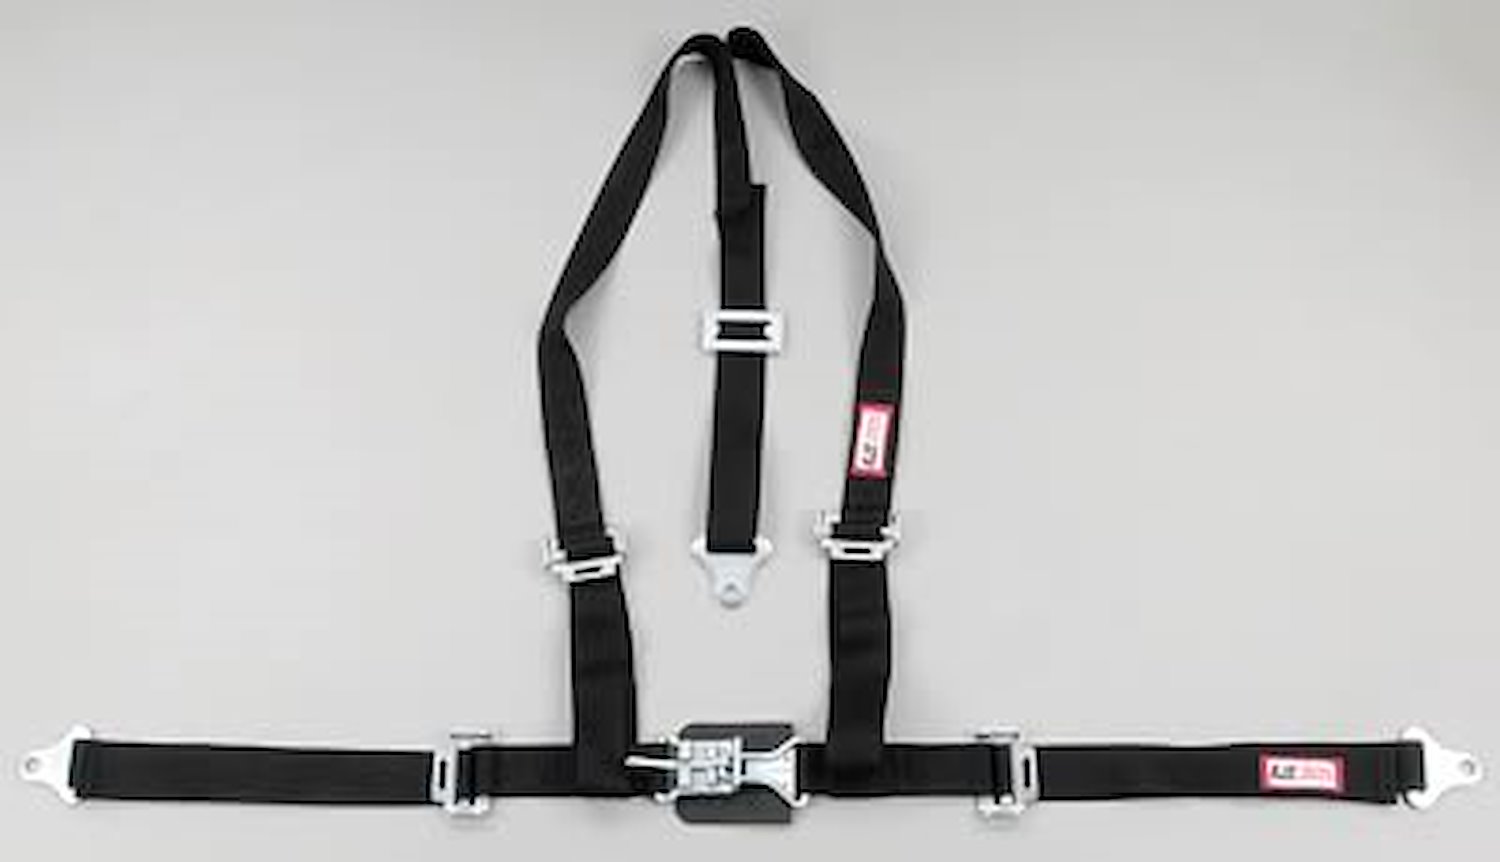 NON-SFI L&L HARNESS 2 PULL DOWN Lap Belt BOLT SEWN IN SEWN IN 2 S.H. INDIVIDUAL FLOOR Mount WRAP/BOLT BLUE